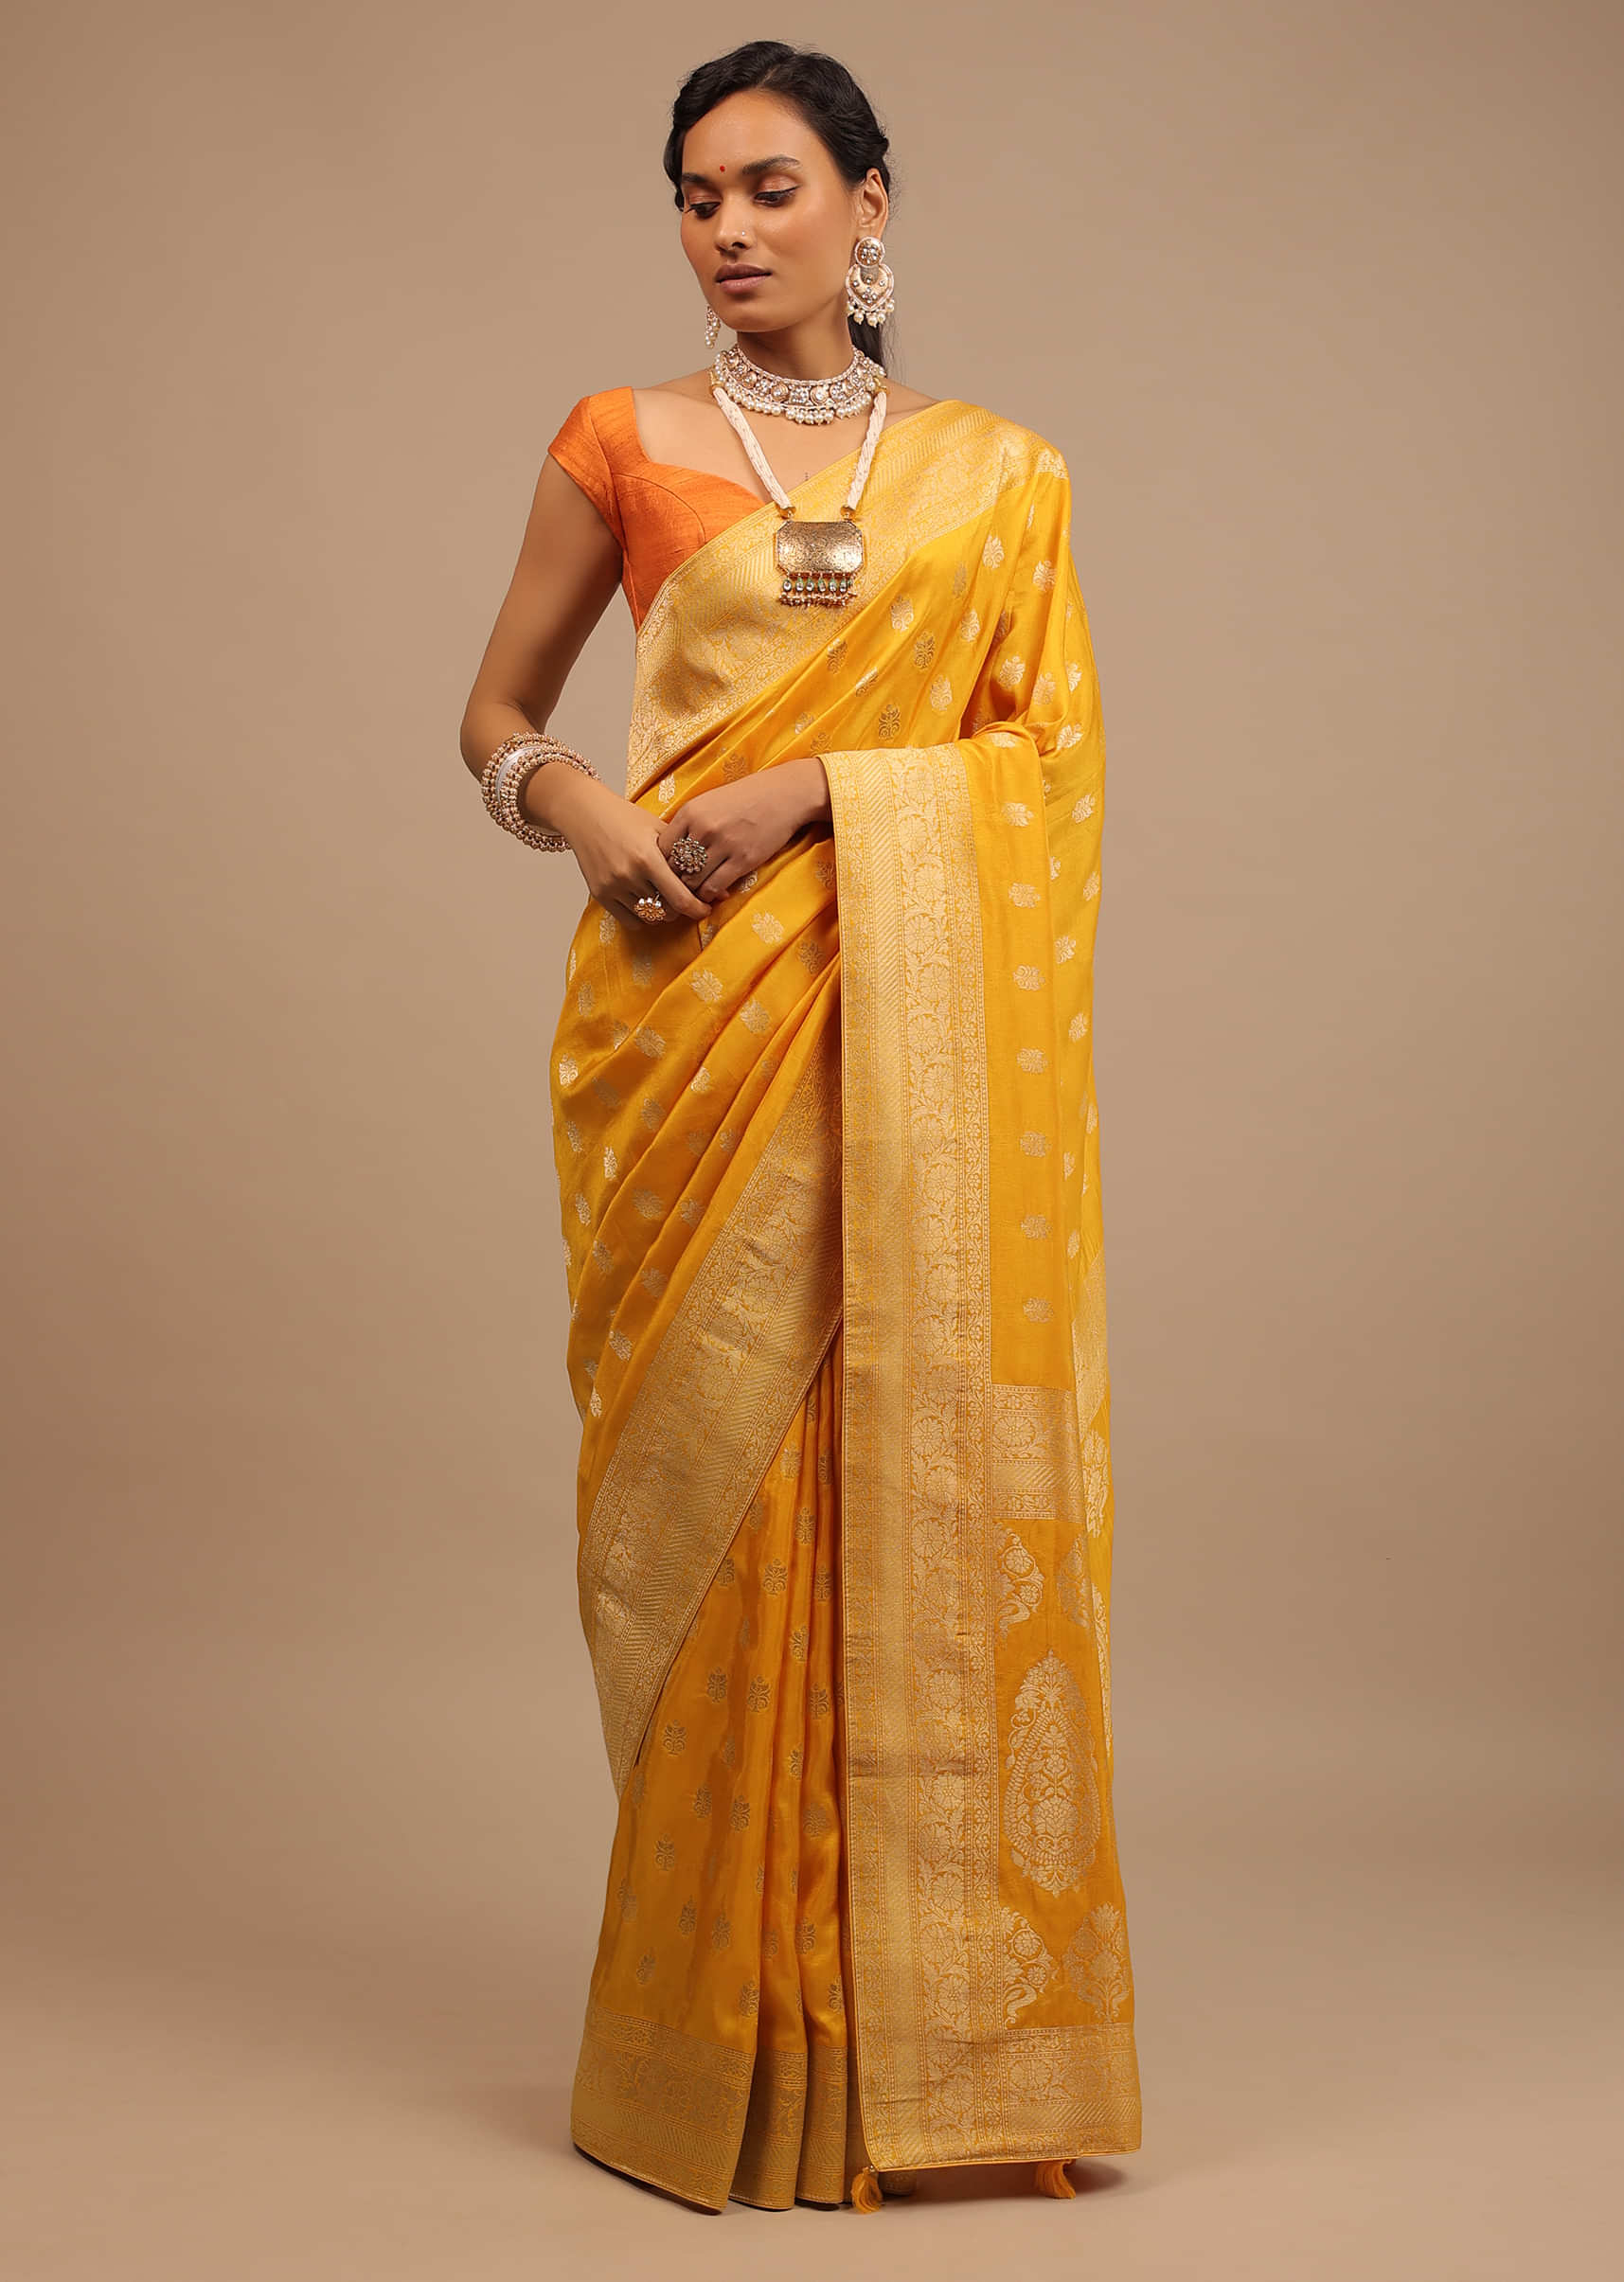 Chrome Yellow Saree In Dola Silk With Woven Buttis And Floral Pallu Weave